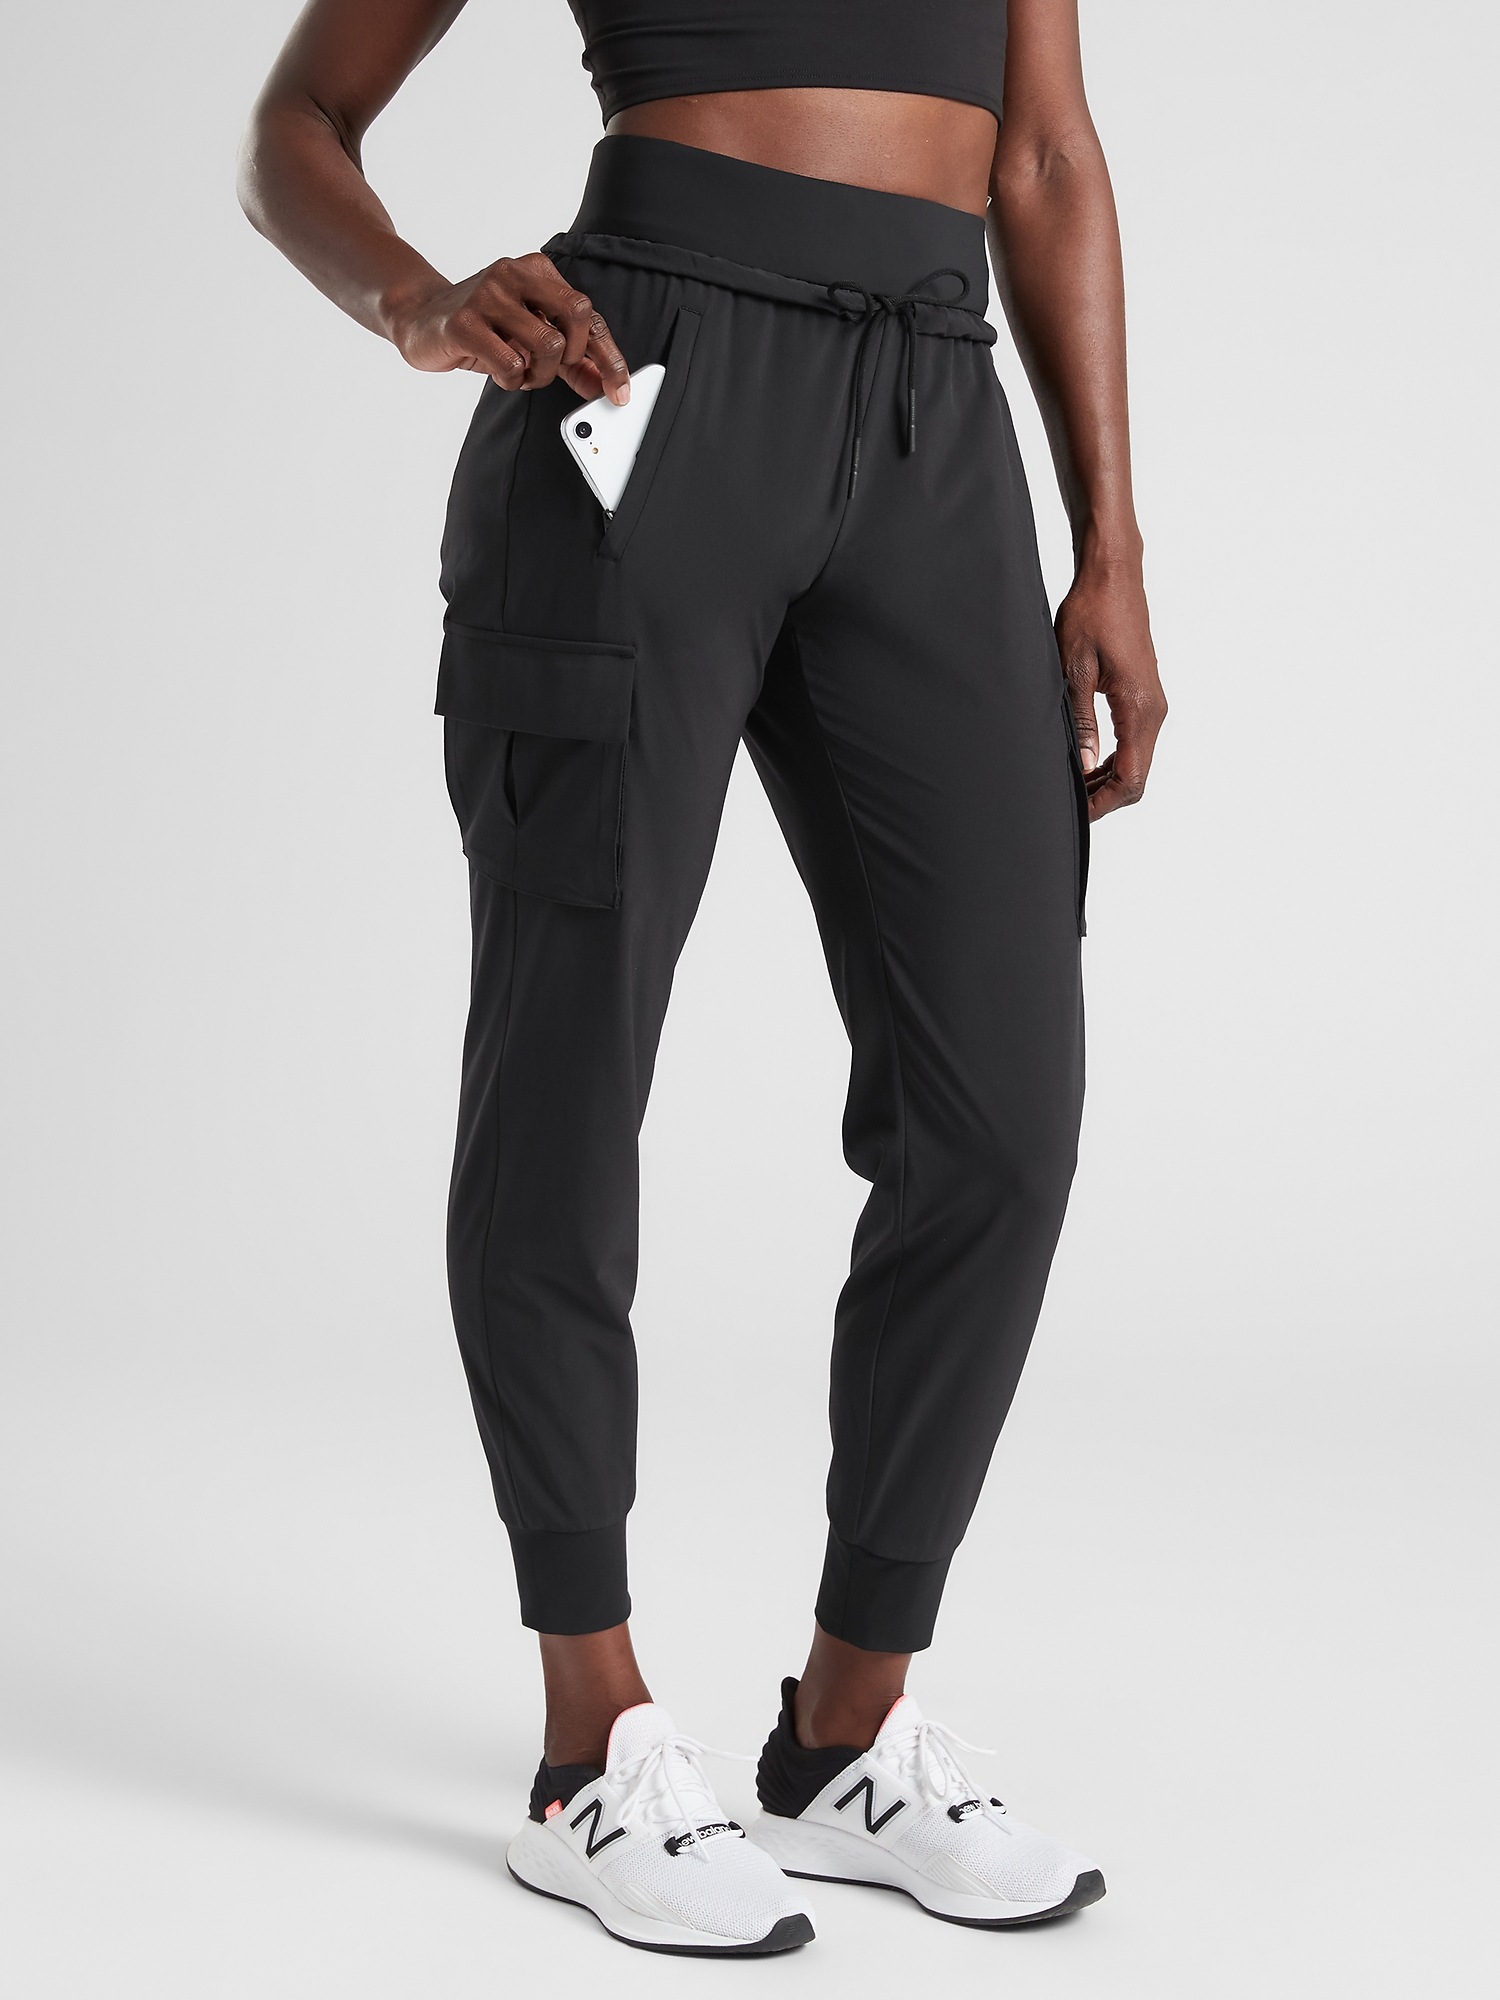 Athleta Jogger Black With White Stripe Down The Side Athletic